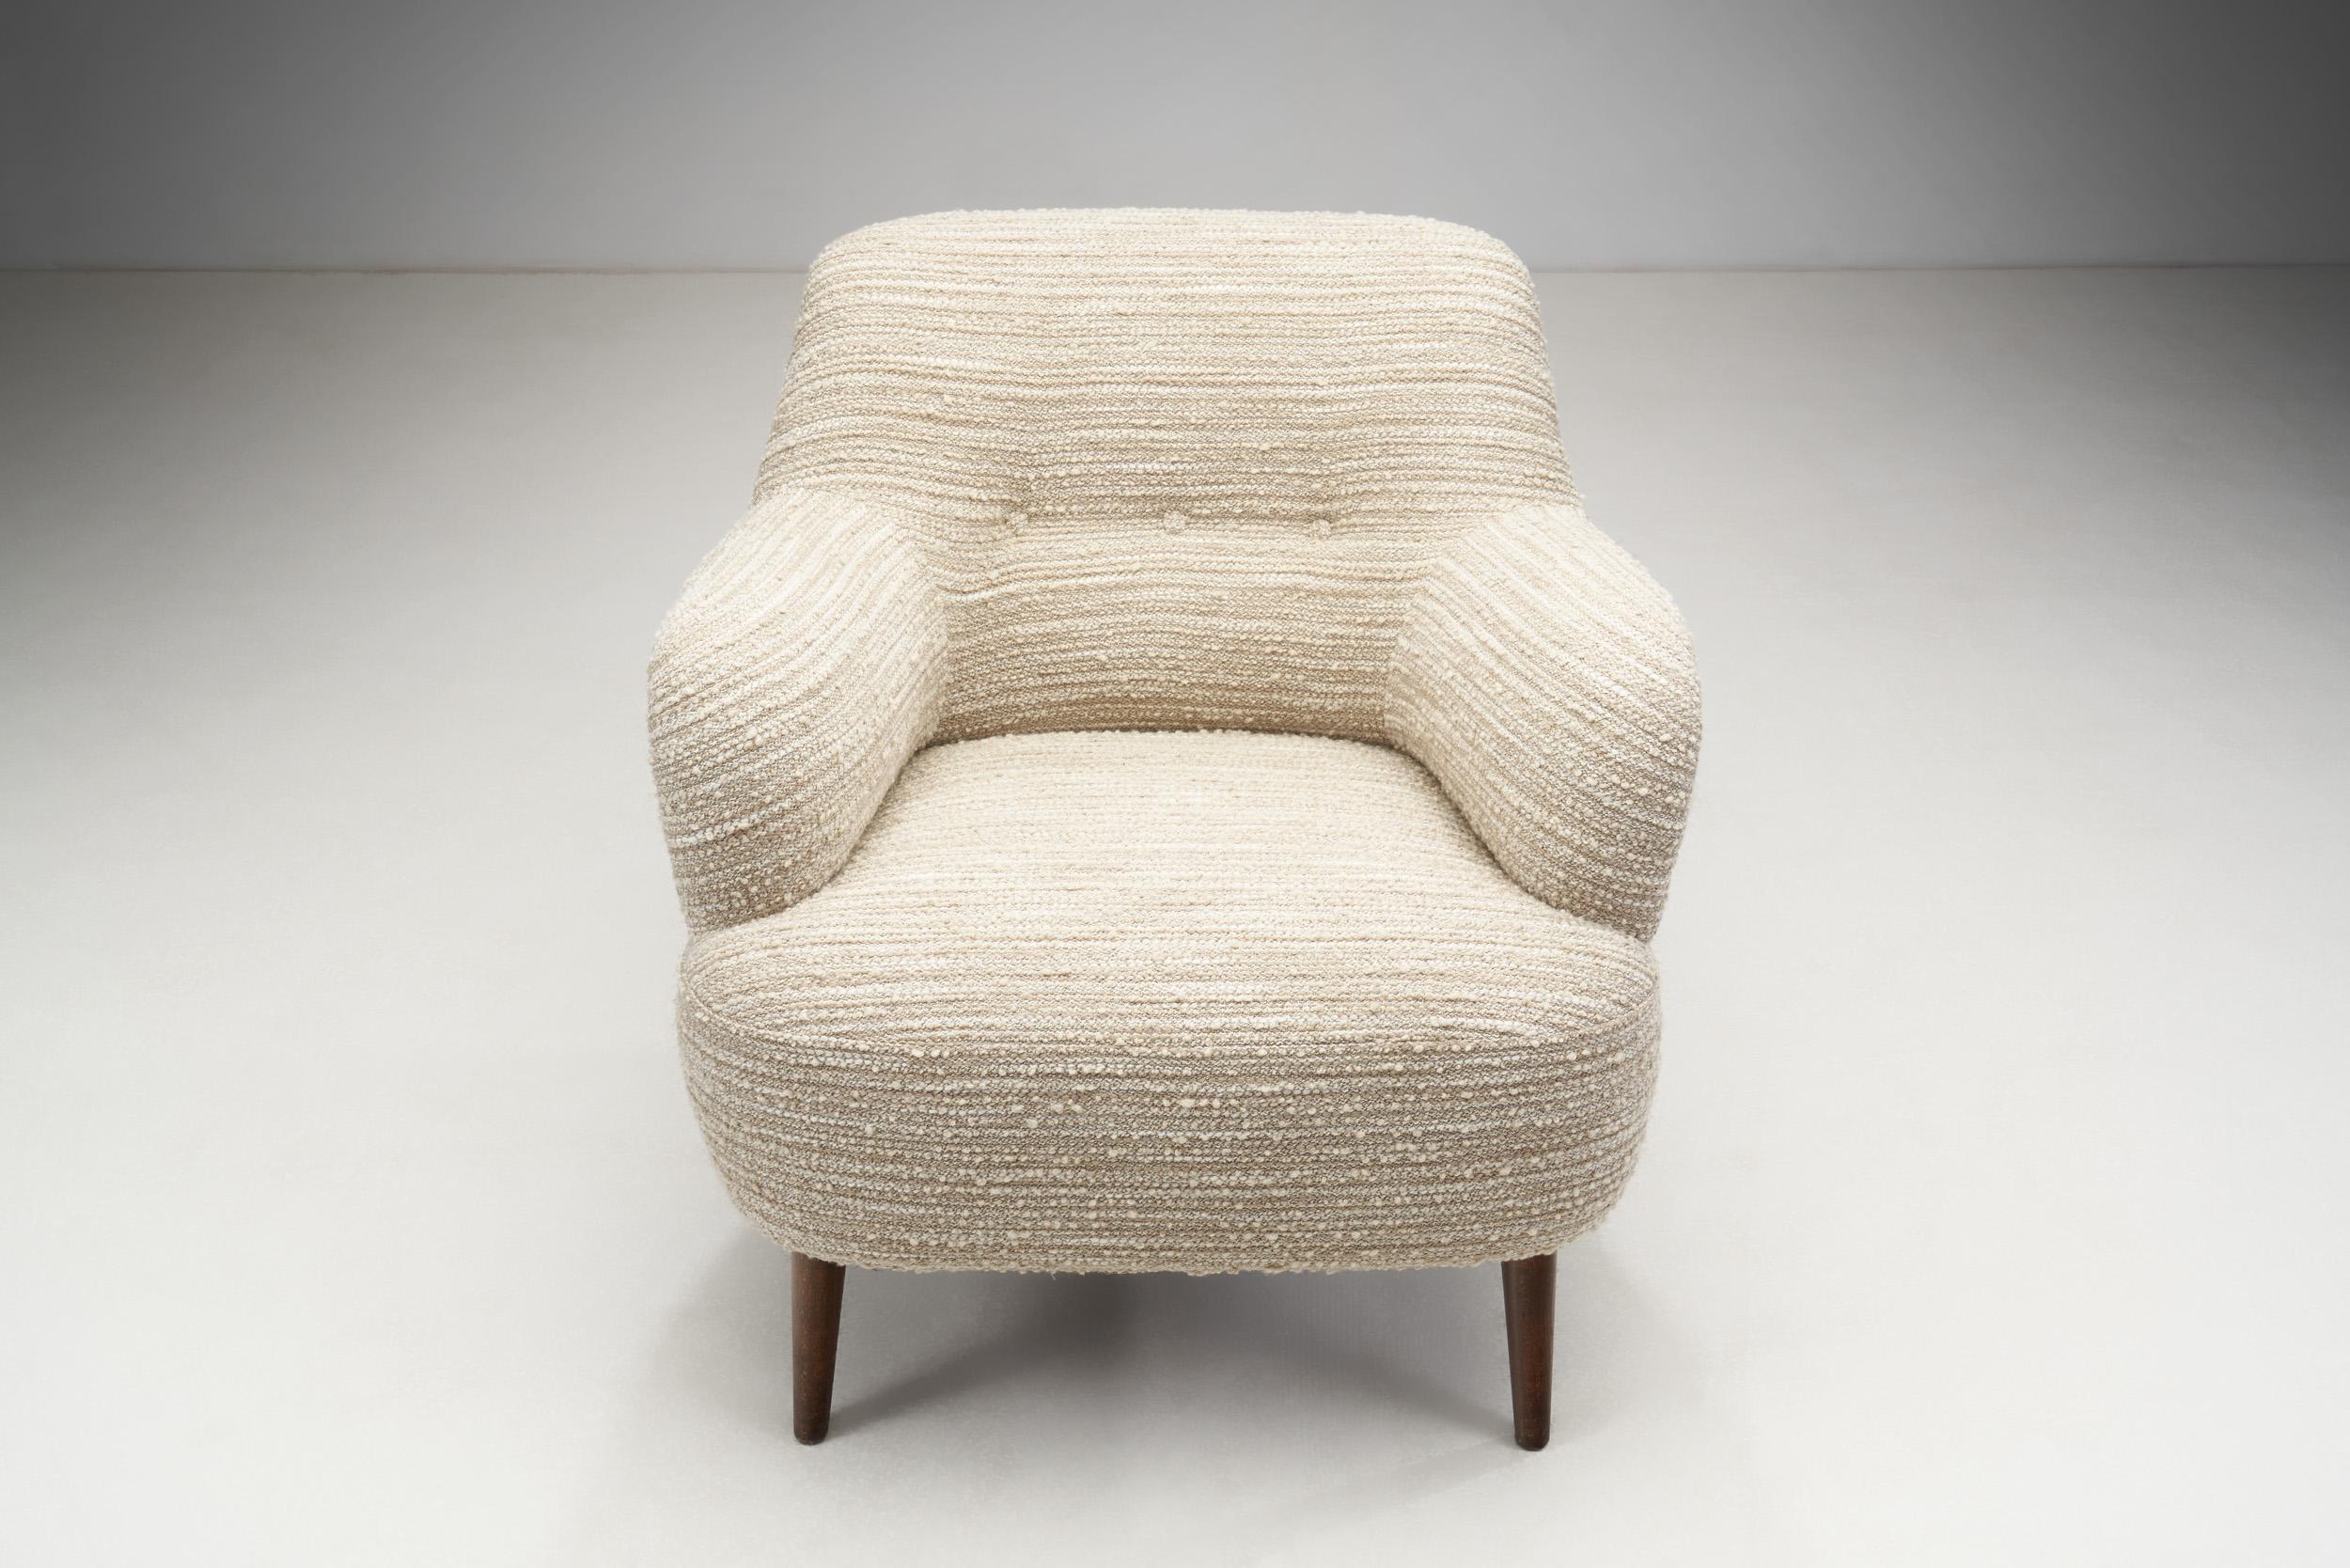 European Mid-Century Modern Armchairs in Bouclé, Europe, ca 1950s For Sale 6